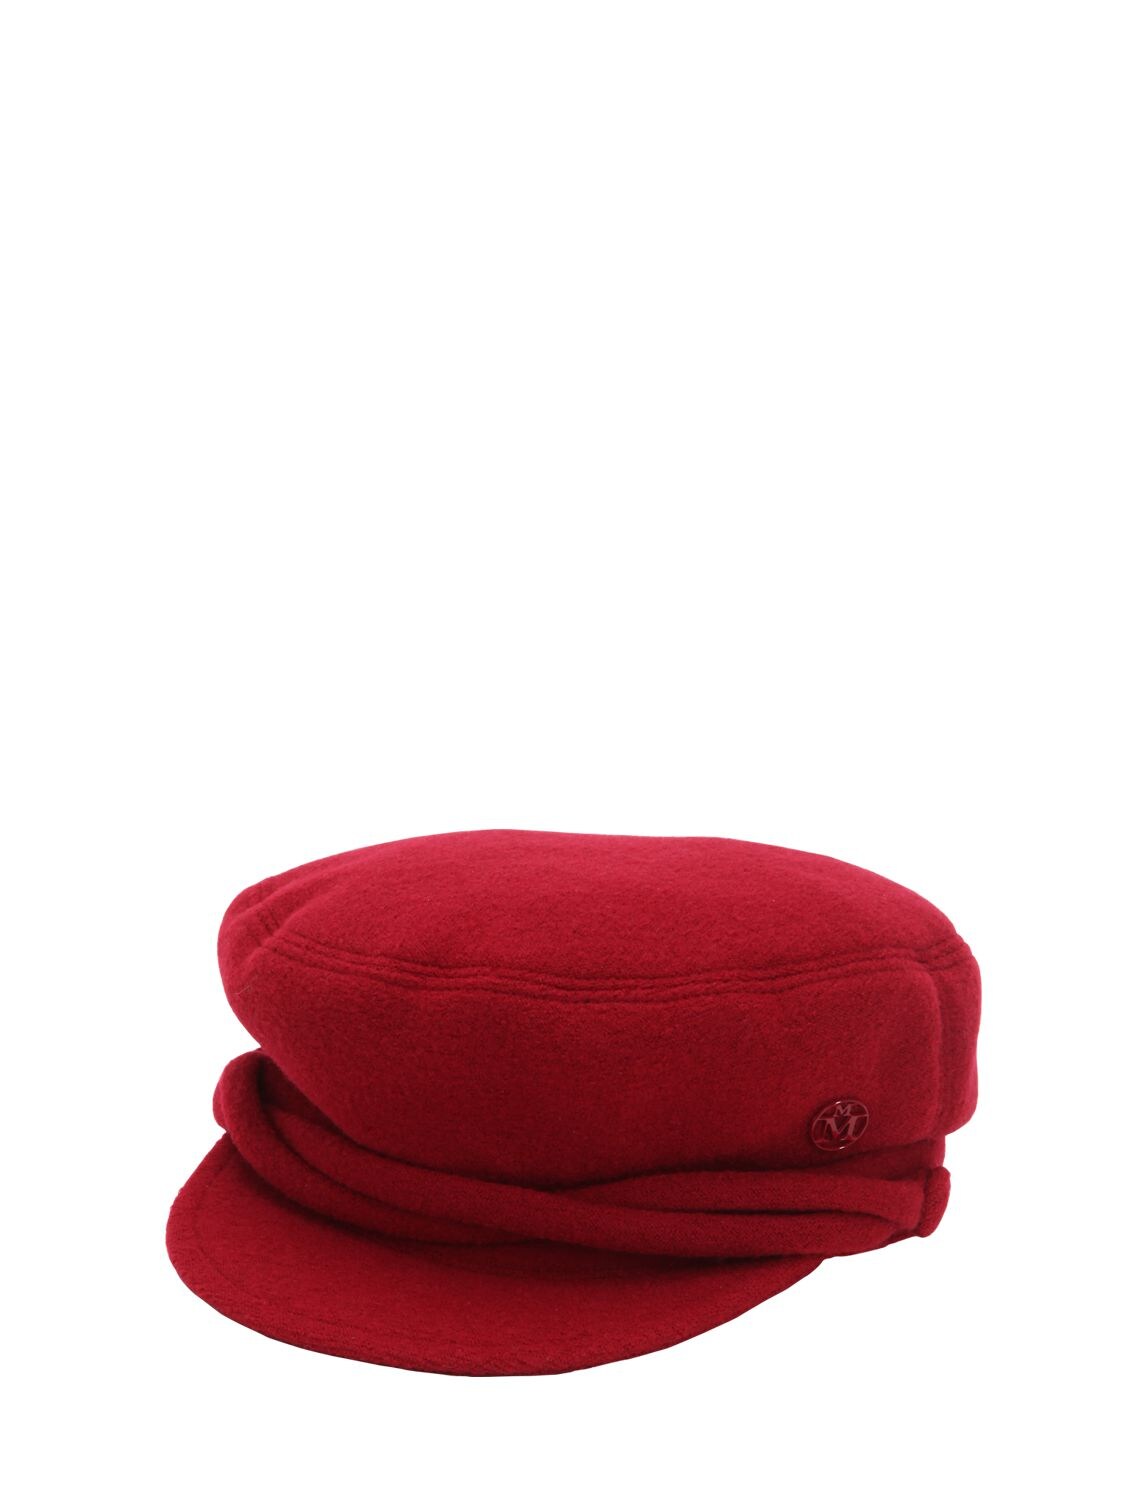 Maison Michel New Abby Wool Captain's Hat In Red